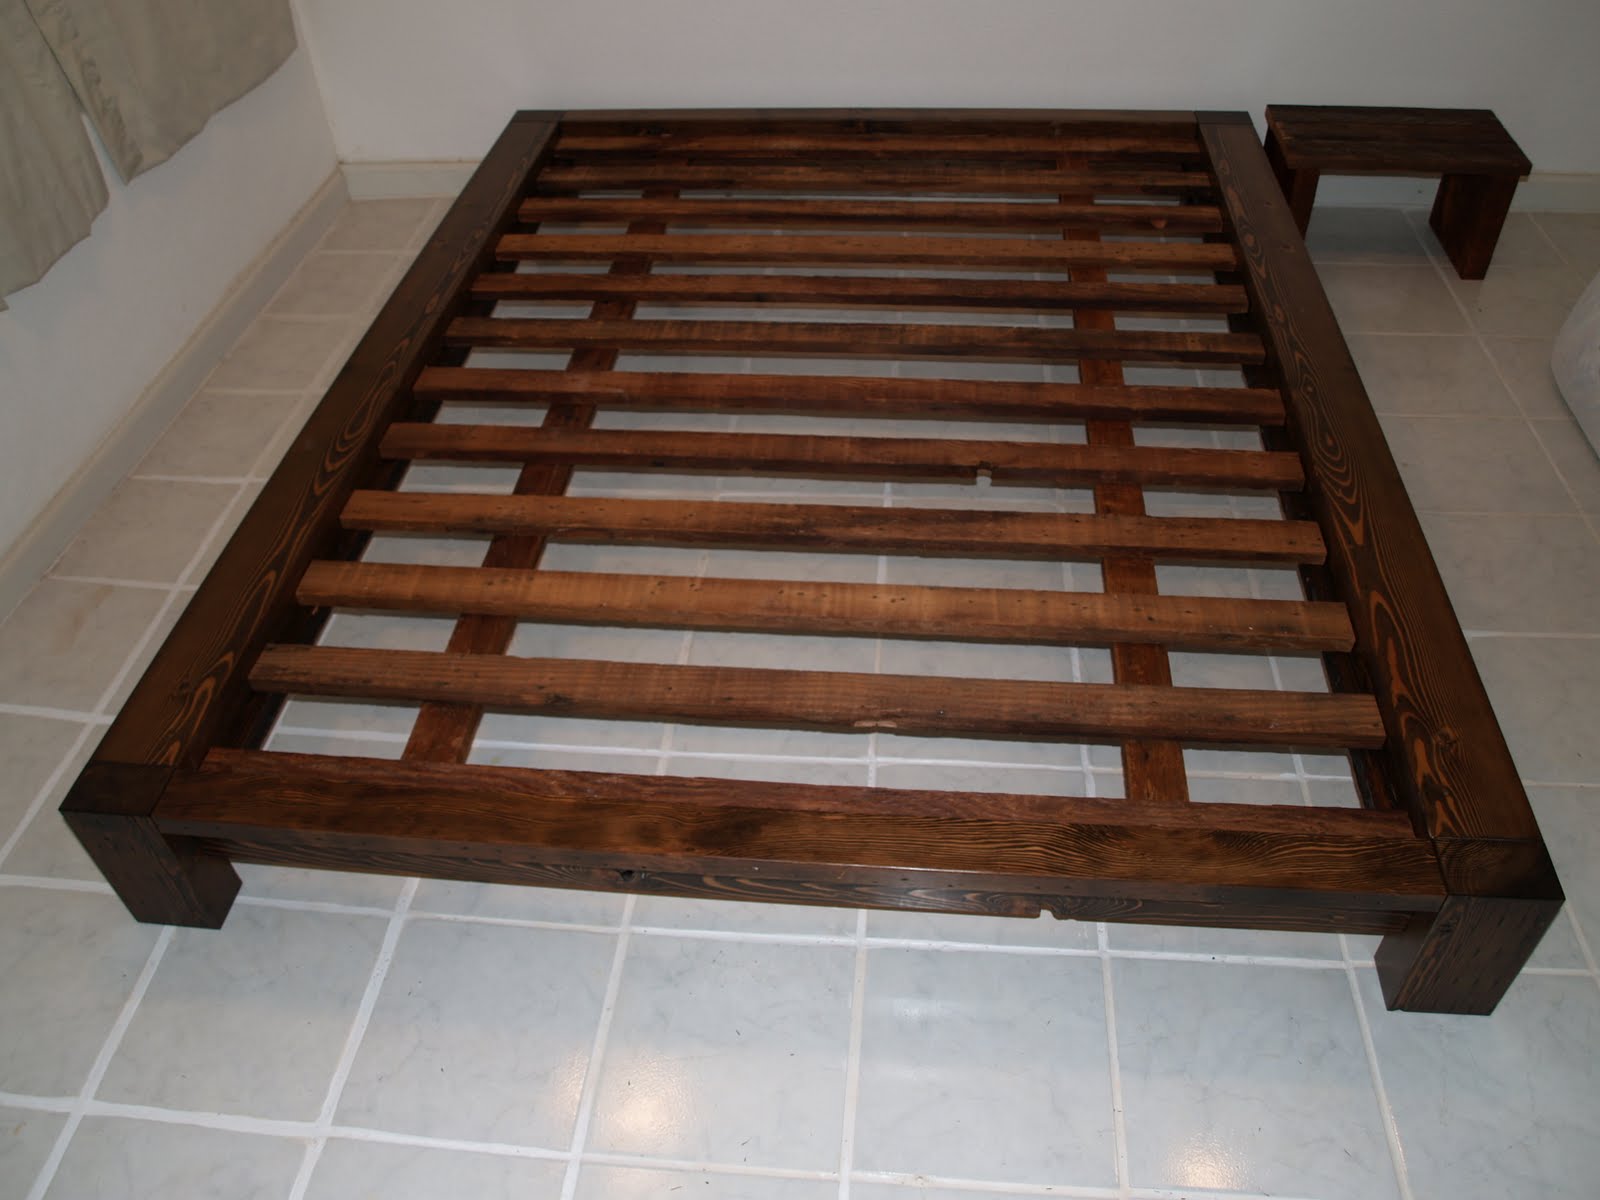 FORWARD THINKING FURNITURE: Queen size bed frame